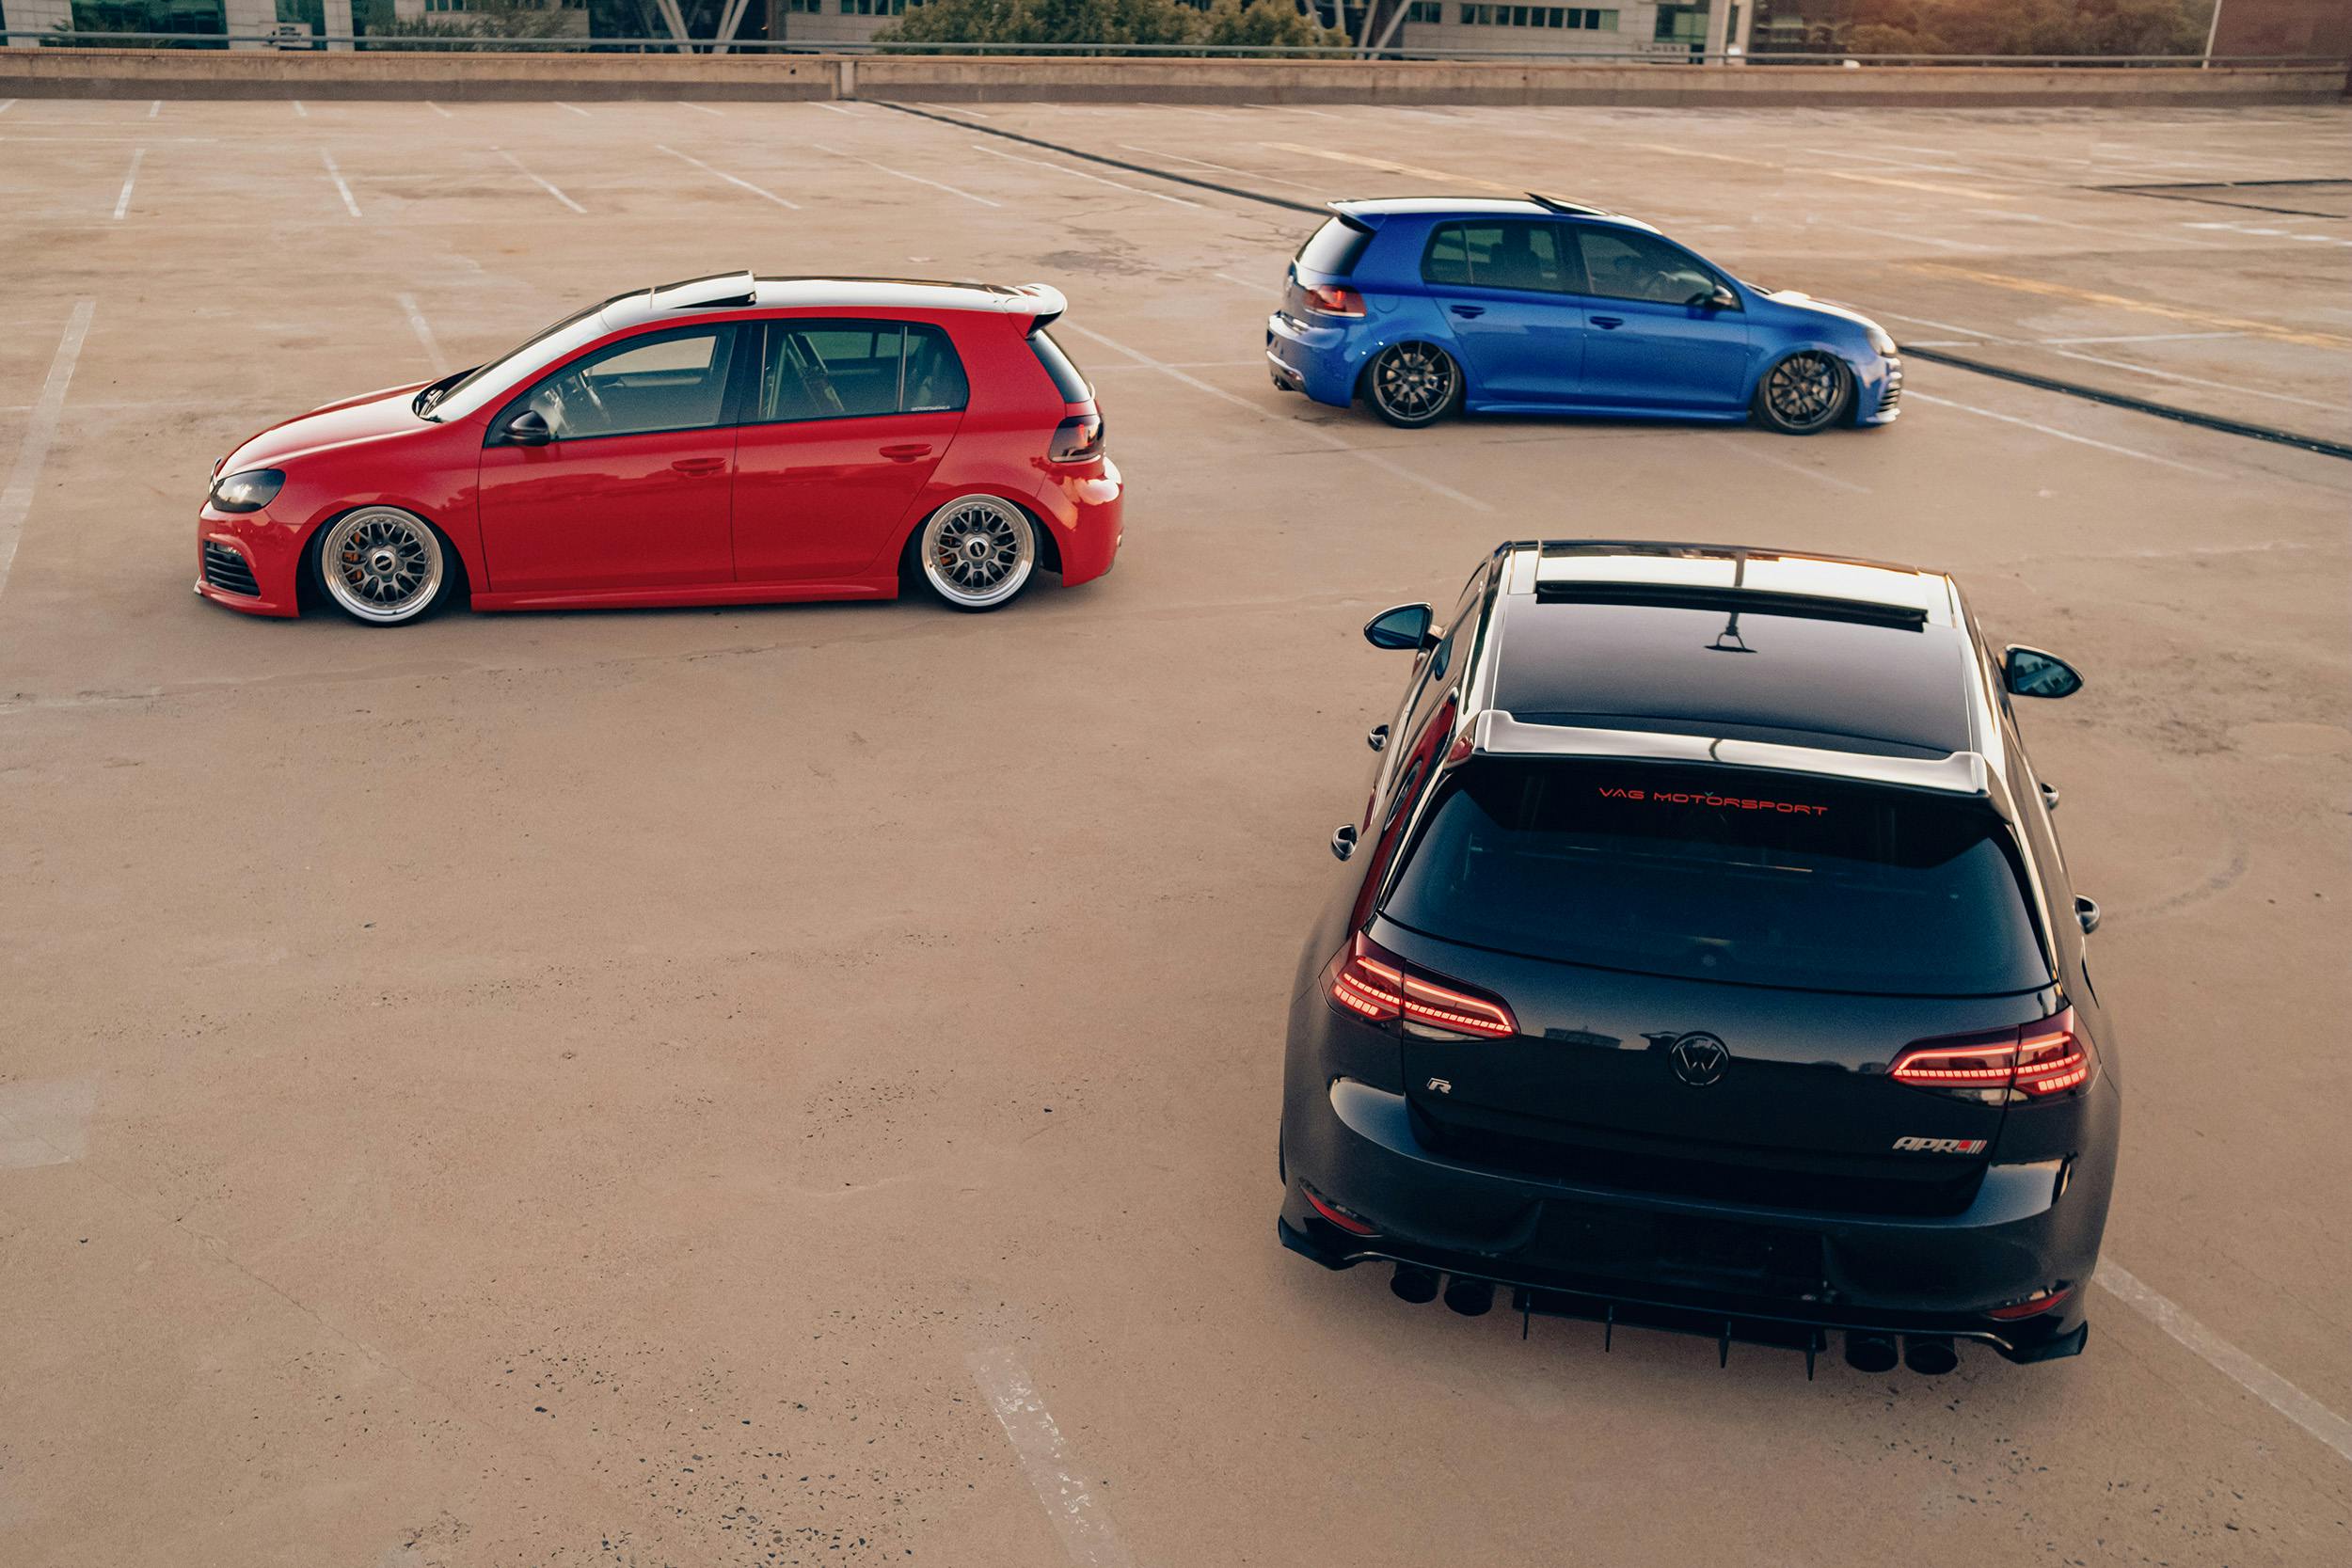 Air Lift Performance Around The World South Africa - VW Golf R trio rear